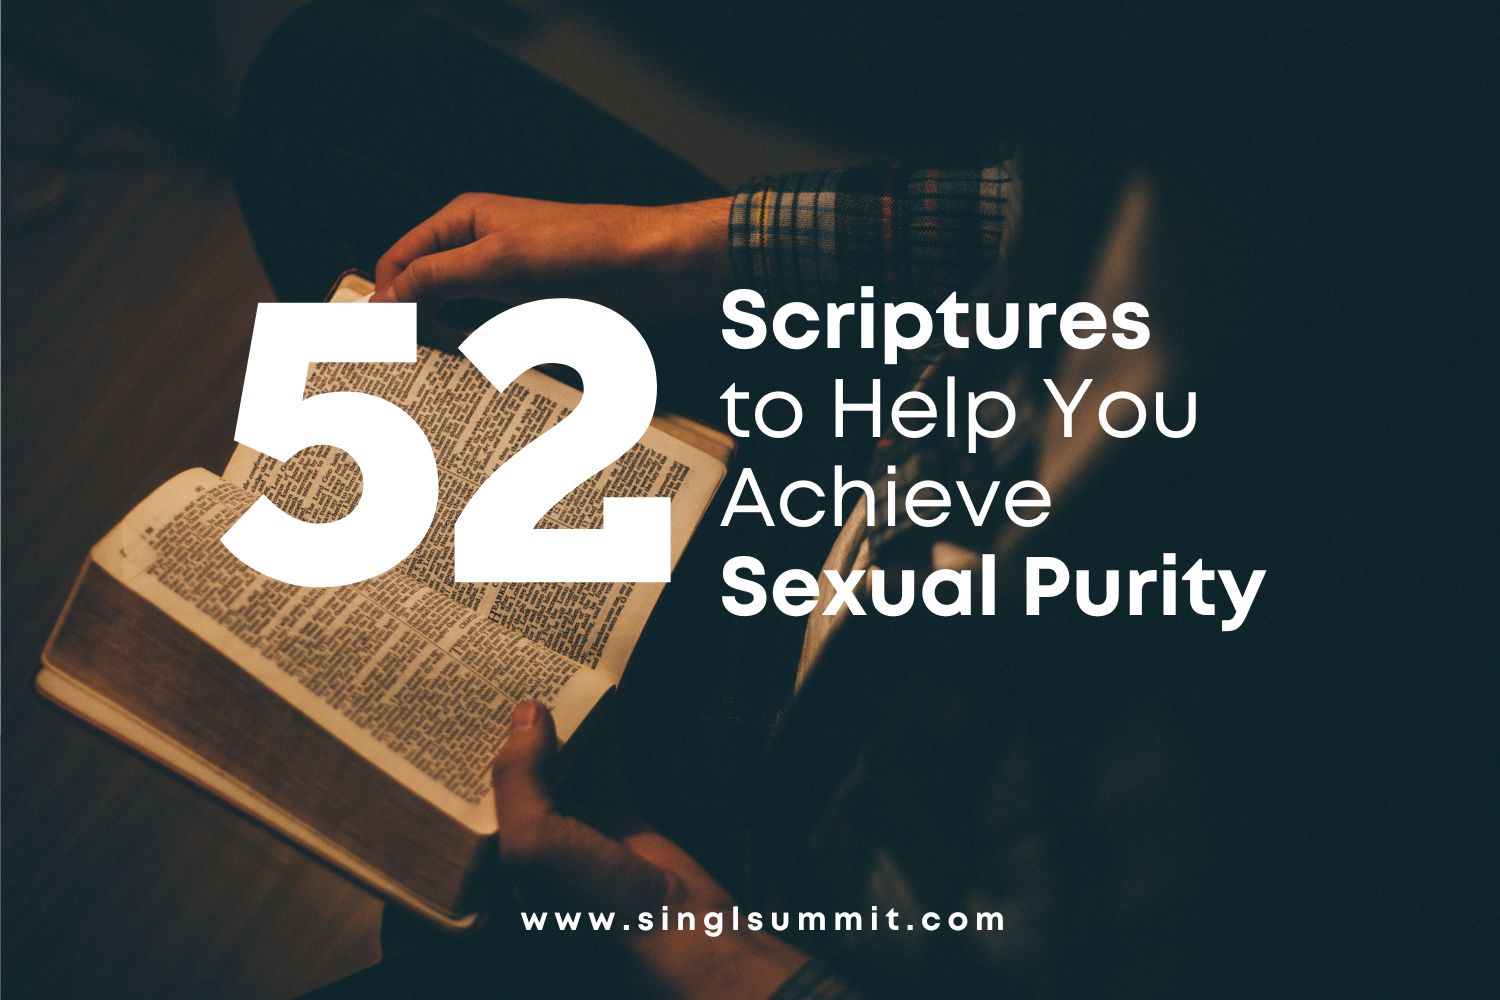 52 Scriptures to Help You Attain Sexual Purity